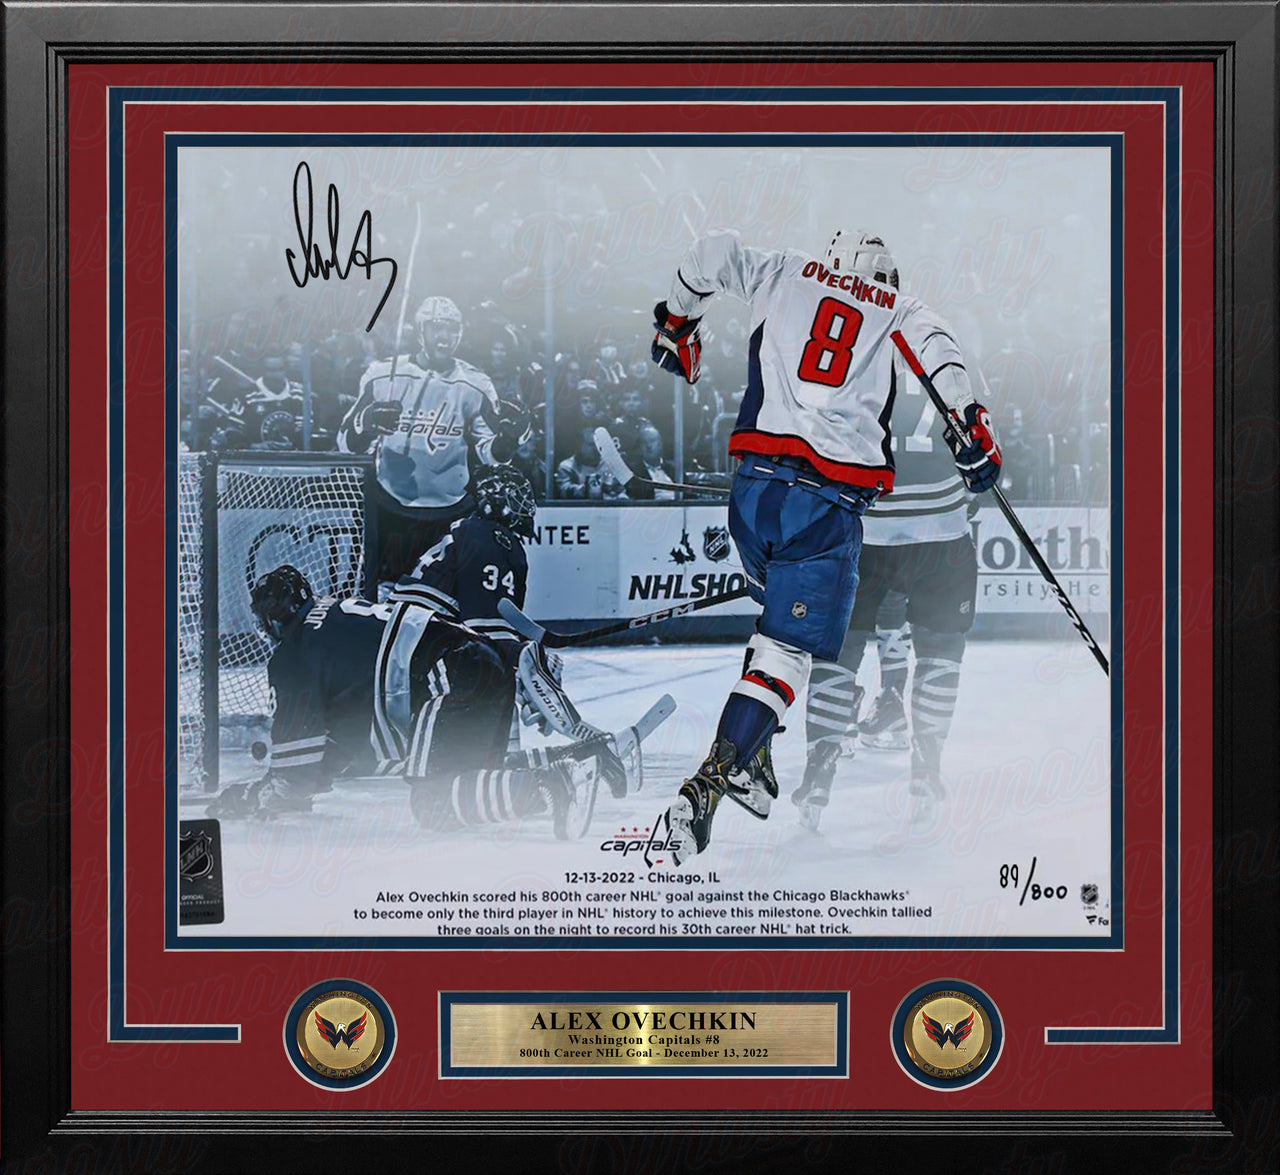 Alex Ovechkin 800th Goal Washington Capitals Autographed 11x14 Framed Photo Numbered to 800